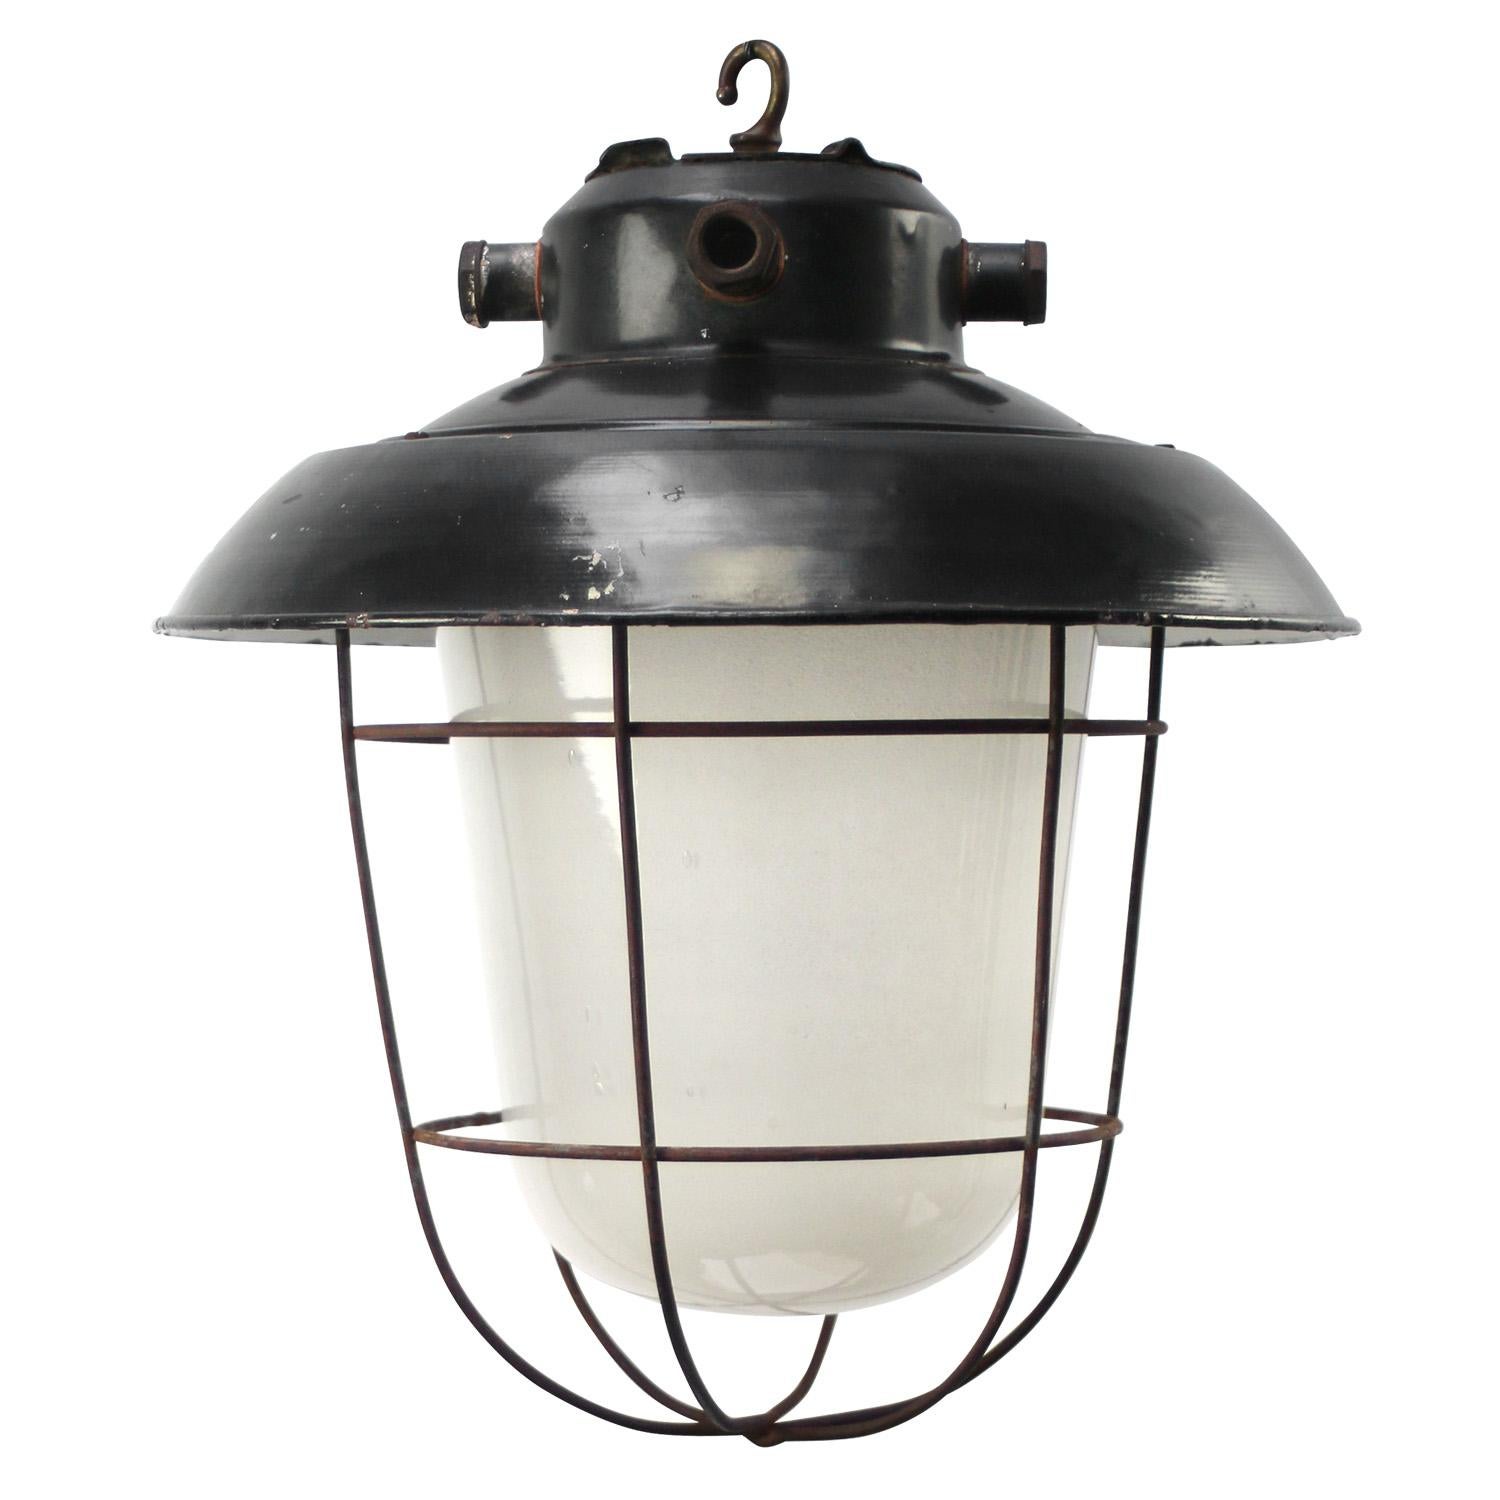 Black enamel industrial lamp. Frosted glass.

Weight 3.0 kg / 6.6 lb. 

Priced per individual item. All lamps have been made suitable by international standards for incandescent light bulbs, energy-efficient and LED bulbs. E26/E27 bulb holders and